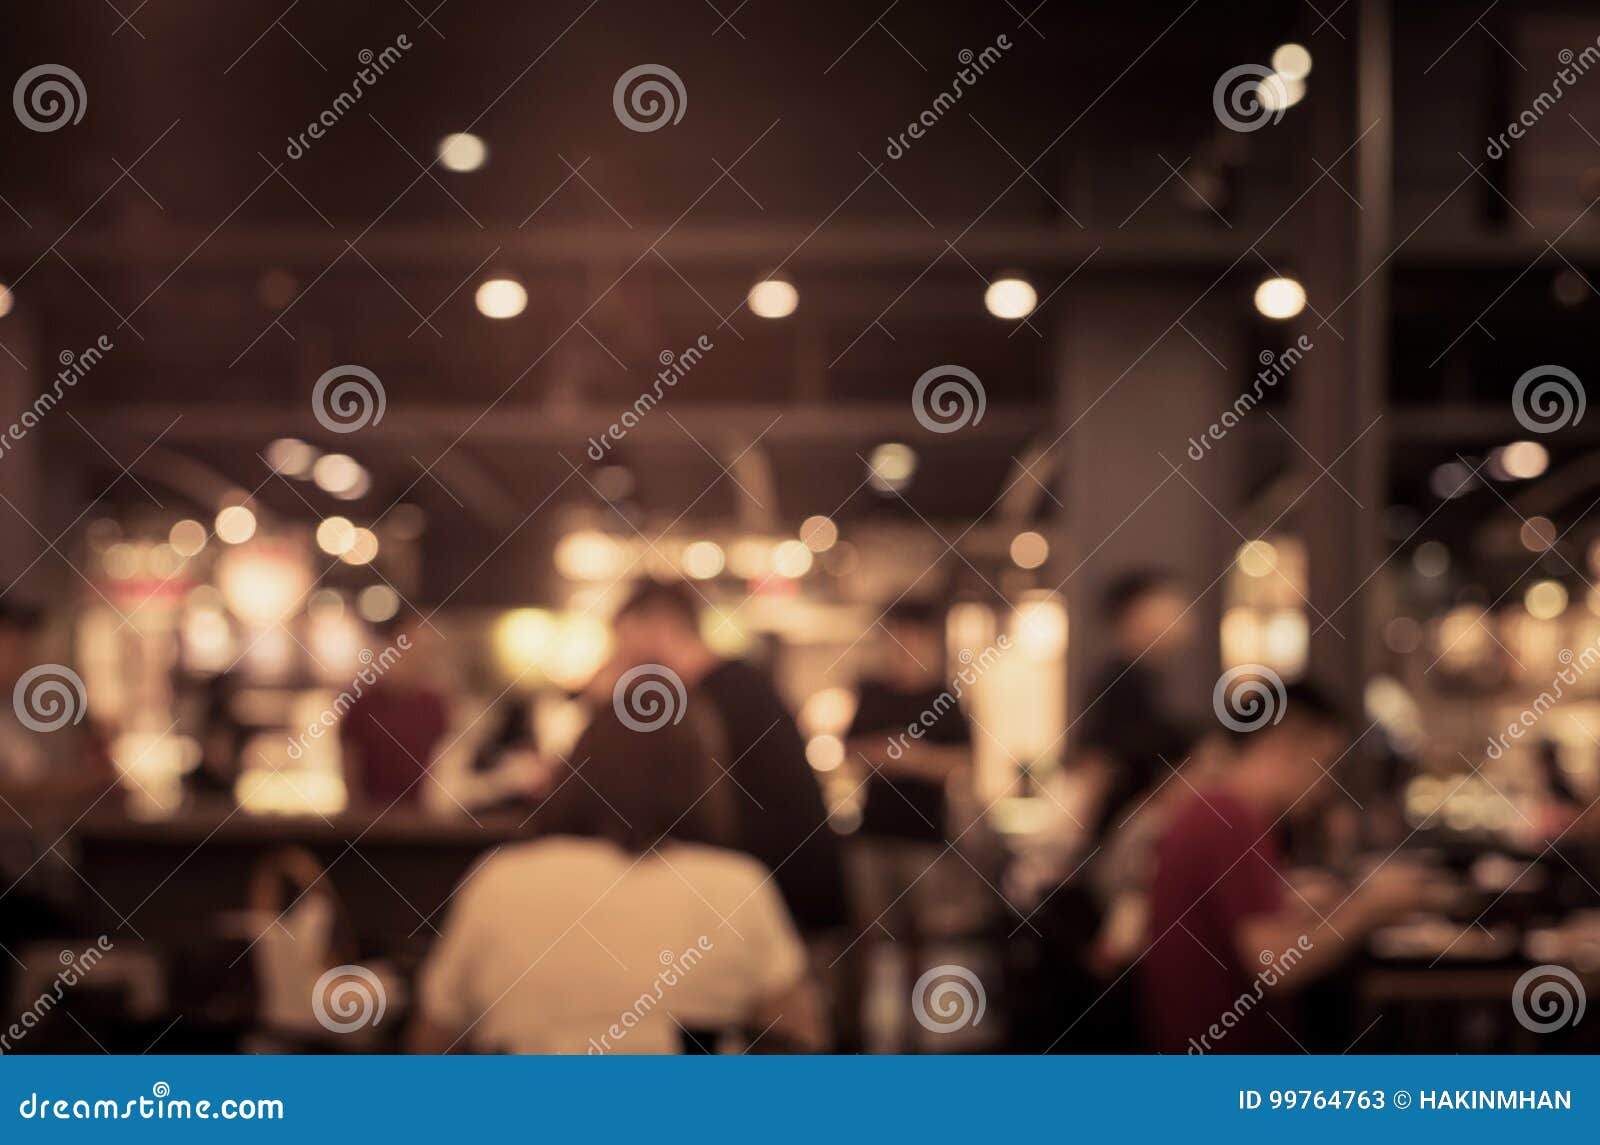 blur of people in cafe,restaurant with lighting background